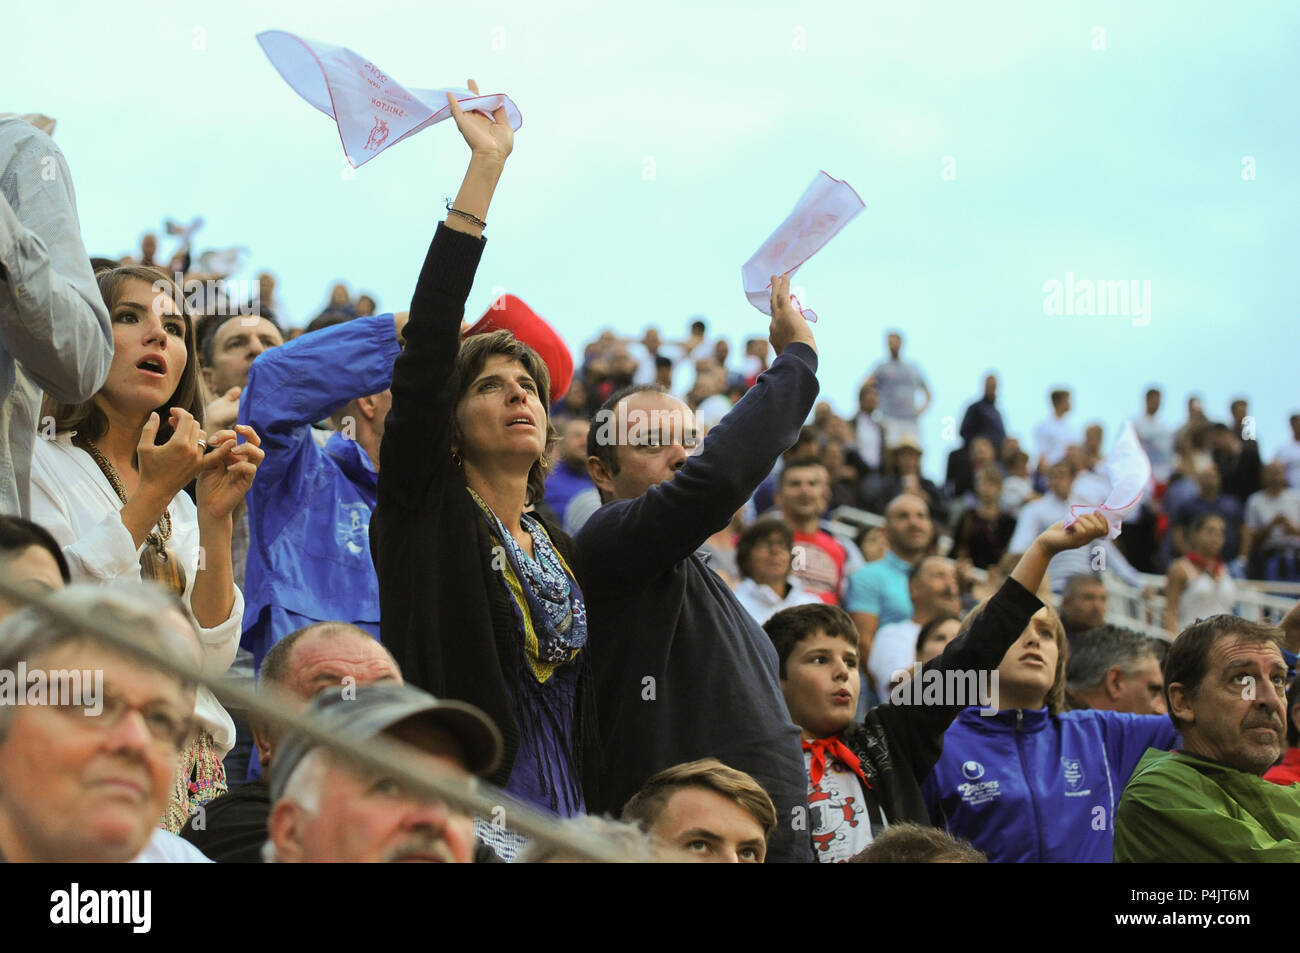 August 13, 2015 - Beziers, France: Members of the audience wave a white  handkerchief to express their satisfaction after a round of bullfighting in  the southern French town of Beziers. Despite growing